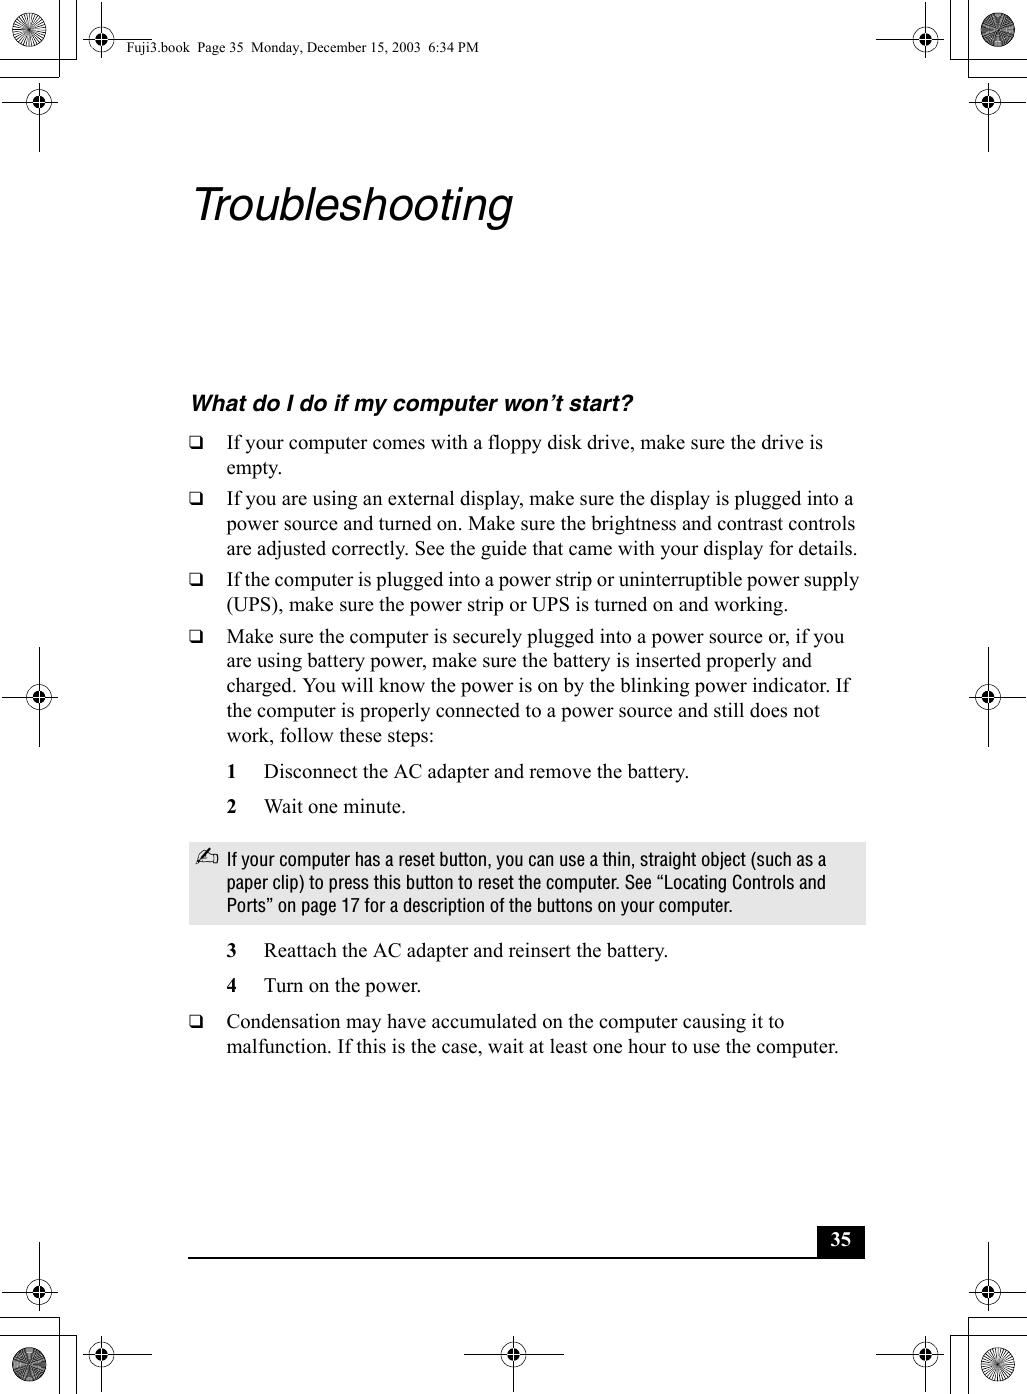 35TroubleshootingWhat do I do if my computer won’t start?❑If your computer comes with a floppy disk drive, make sure the drive is empty. ❑If you are using an external display, make sure the display is plugged into a power source and turned on. Make sure the brightness and contrast controls are adjusted correctly. See the guide that came with your display for details.❑If the computer is plugged into a power strip or uninterruptible power supply (UPS), make sure the power strip or UPS is turned on and working.❑Make sure the computer is securely plugged into a power source or, if you are using battery power, make sure the battery is inserted properly and charged. You will know the power is on by the blinking power indicator. If the computer is properly connected to a power source and still does not work, follow these steps:1Disconnect the AC adapter and remove the battery. 2Wait one minute.3Reattach the AC adapter and reinsert the battery.4Turn on the power.❑Condensation may have accumulated on the computer causing it to malfunction. If this is the case, wait at least one hour to use the computer.✍If your computer has a reset button, you can use a thin, straight object (such as a paper clip) to press this button to reset the computer. See “Locating Controls and Ports” on page 17 for a description of the buttons on your computer.Fuji3.book  Page 35  Monday, December 15, 2003  6:34 PM